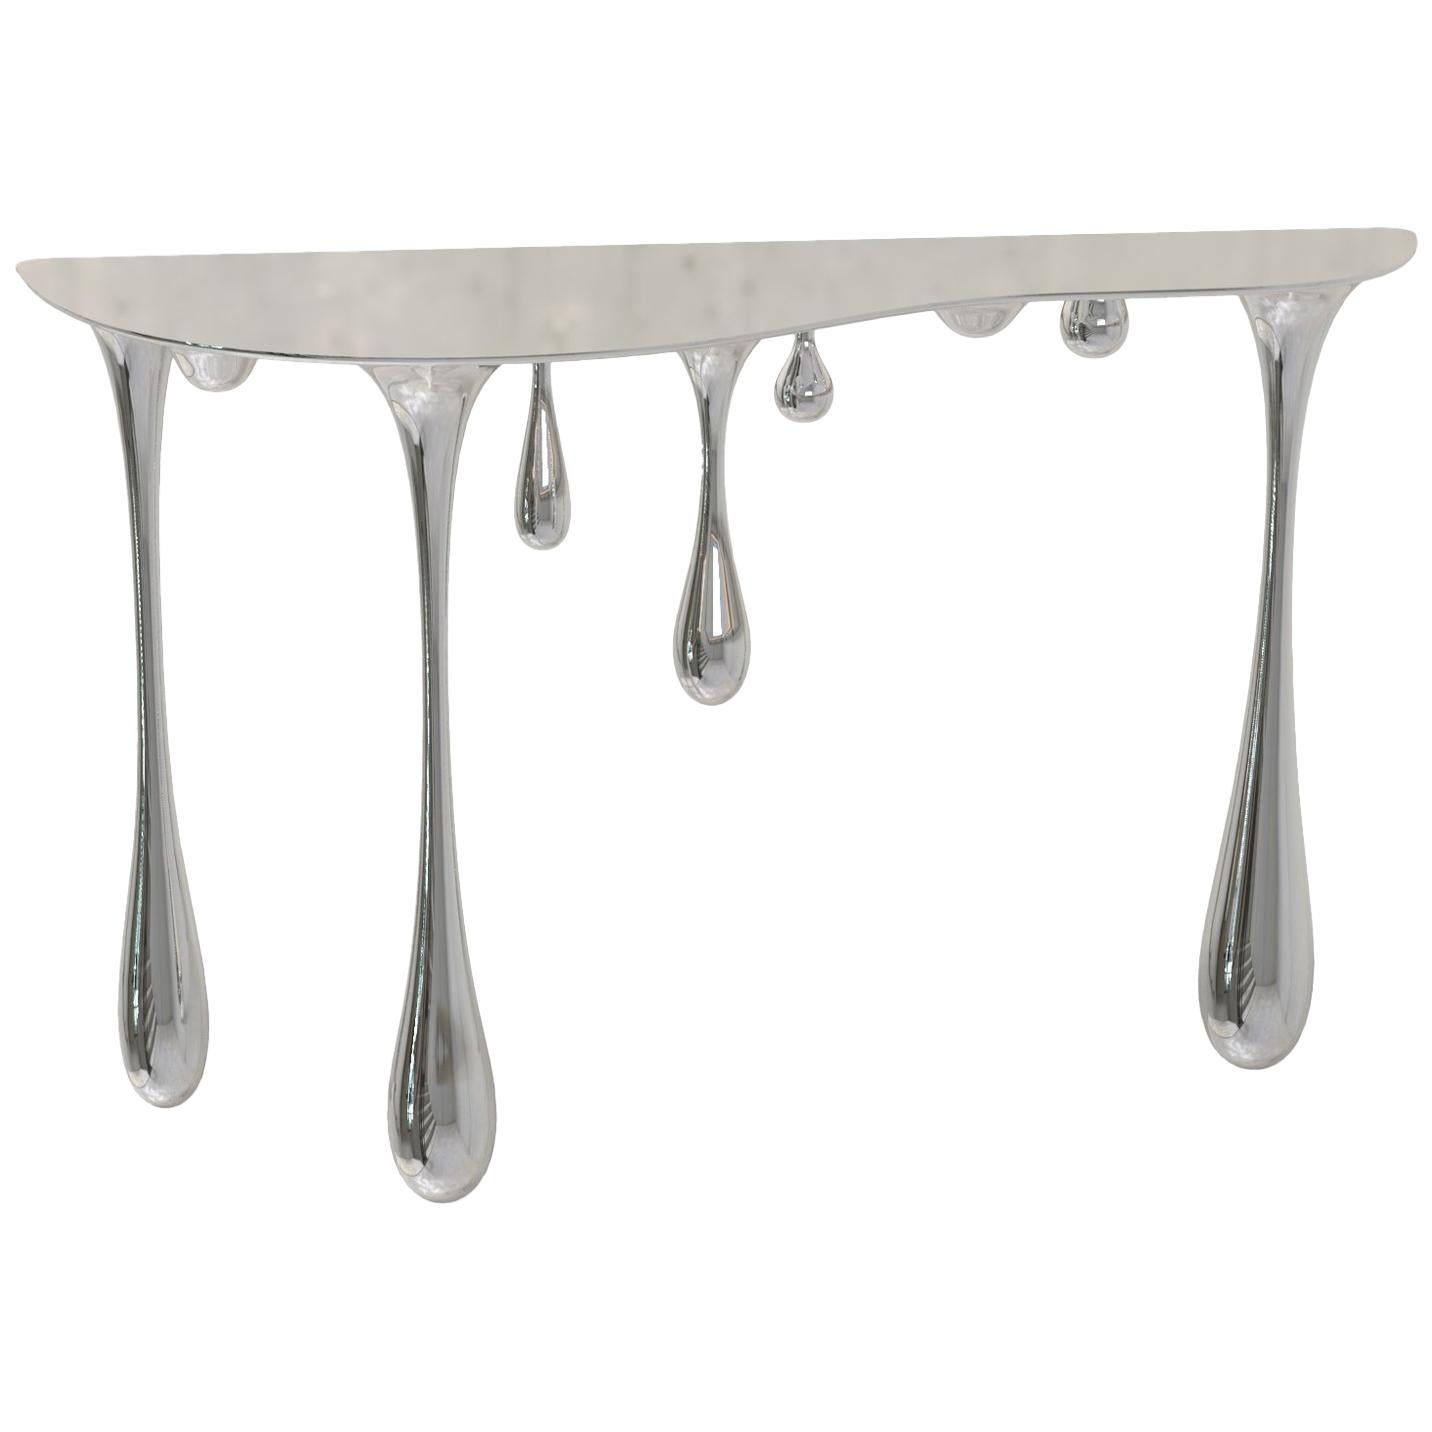 Dripping Console Table No.2 Hallway Entry Table by Zhipeng Tan